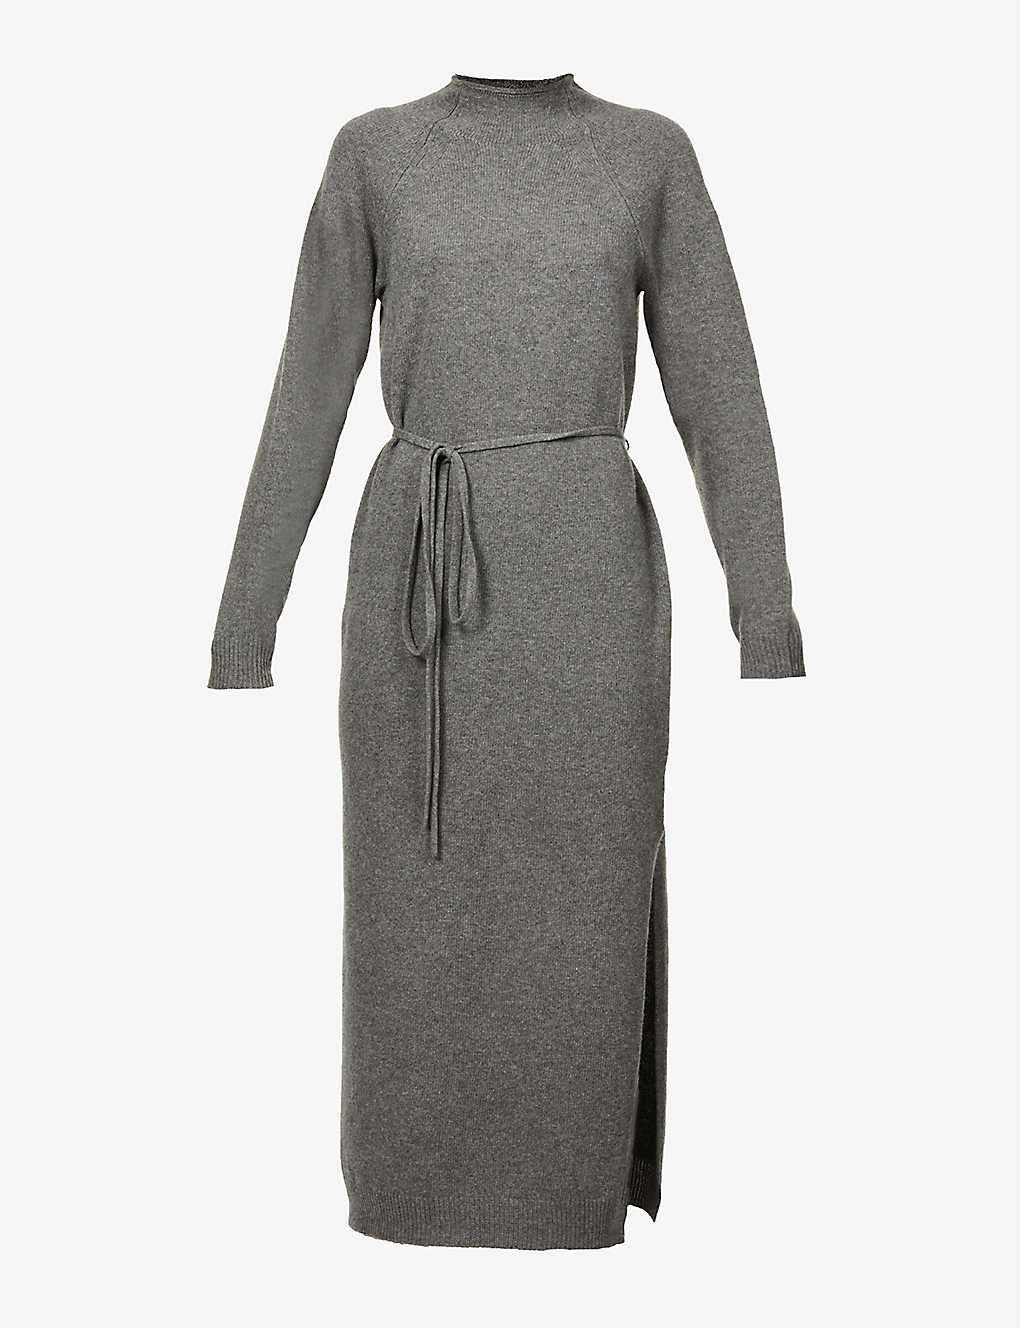 Theory High-Neck Wool and Cashmere Dress